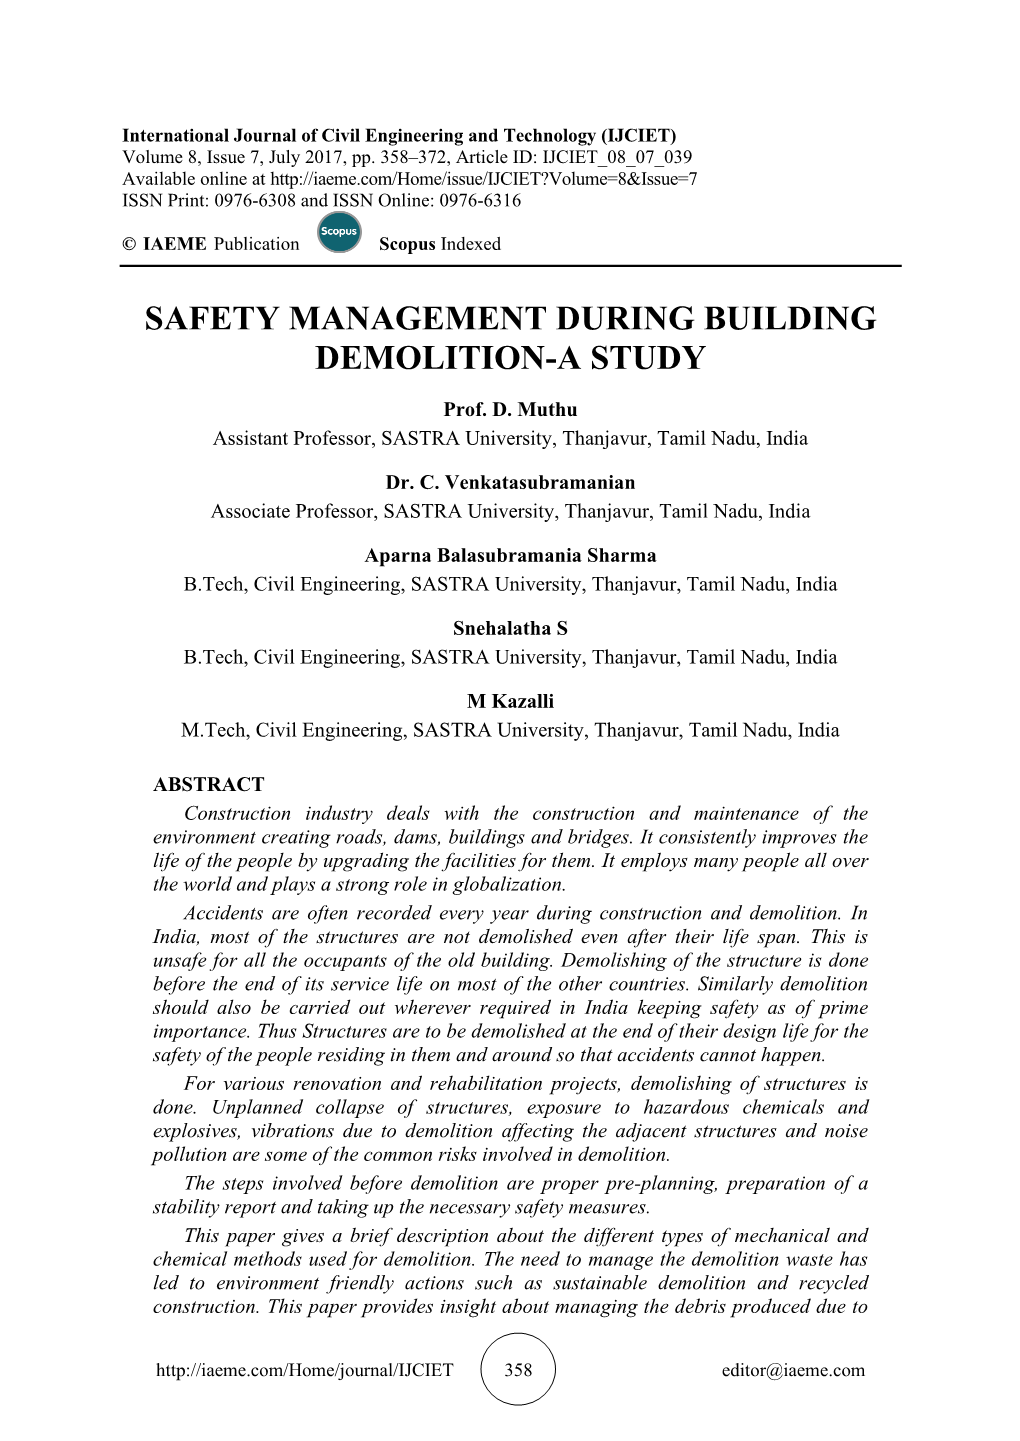 Safety Management During Building Demolition-A Study